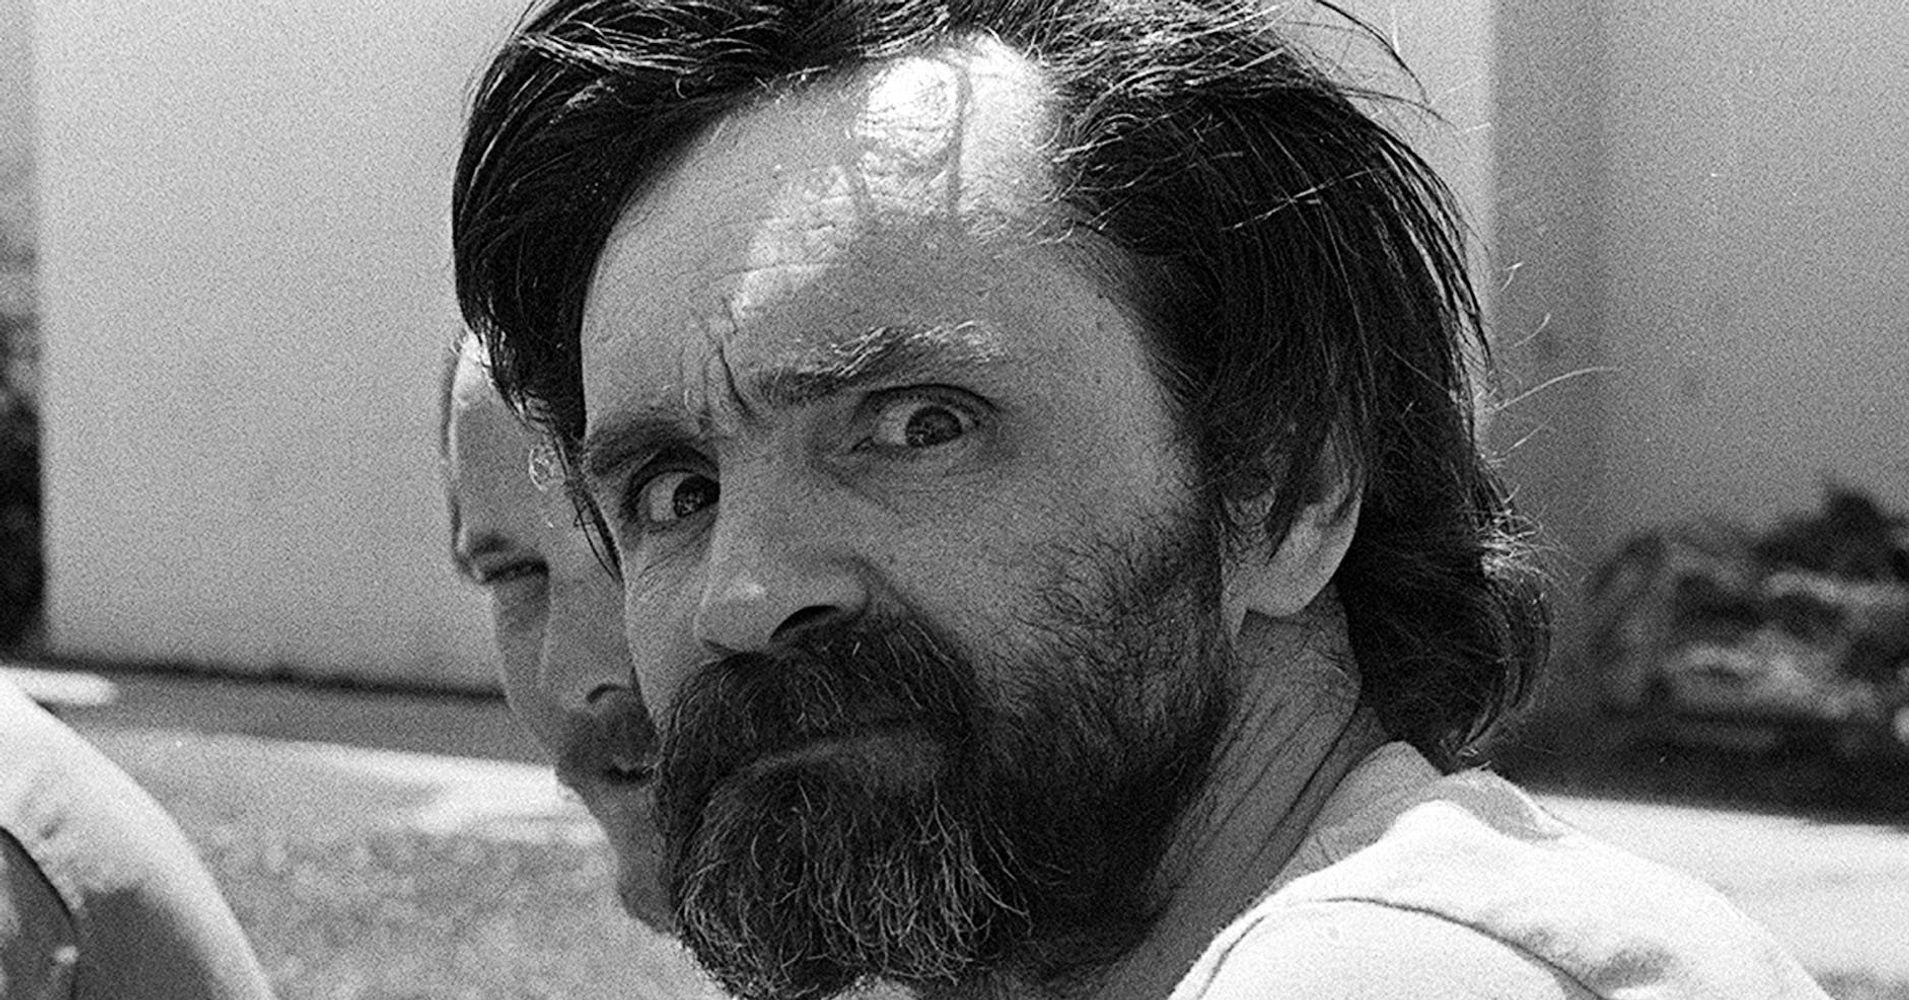 A Timeline Of Charles Manson’s Path To Infamy | HuffPost